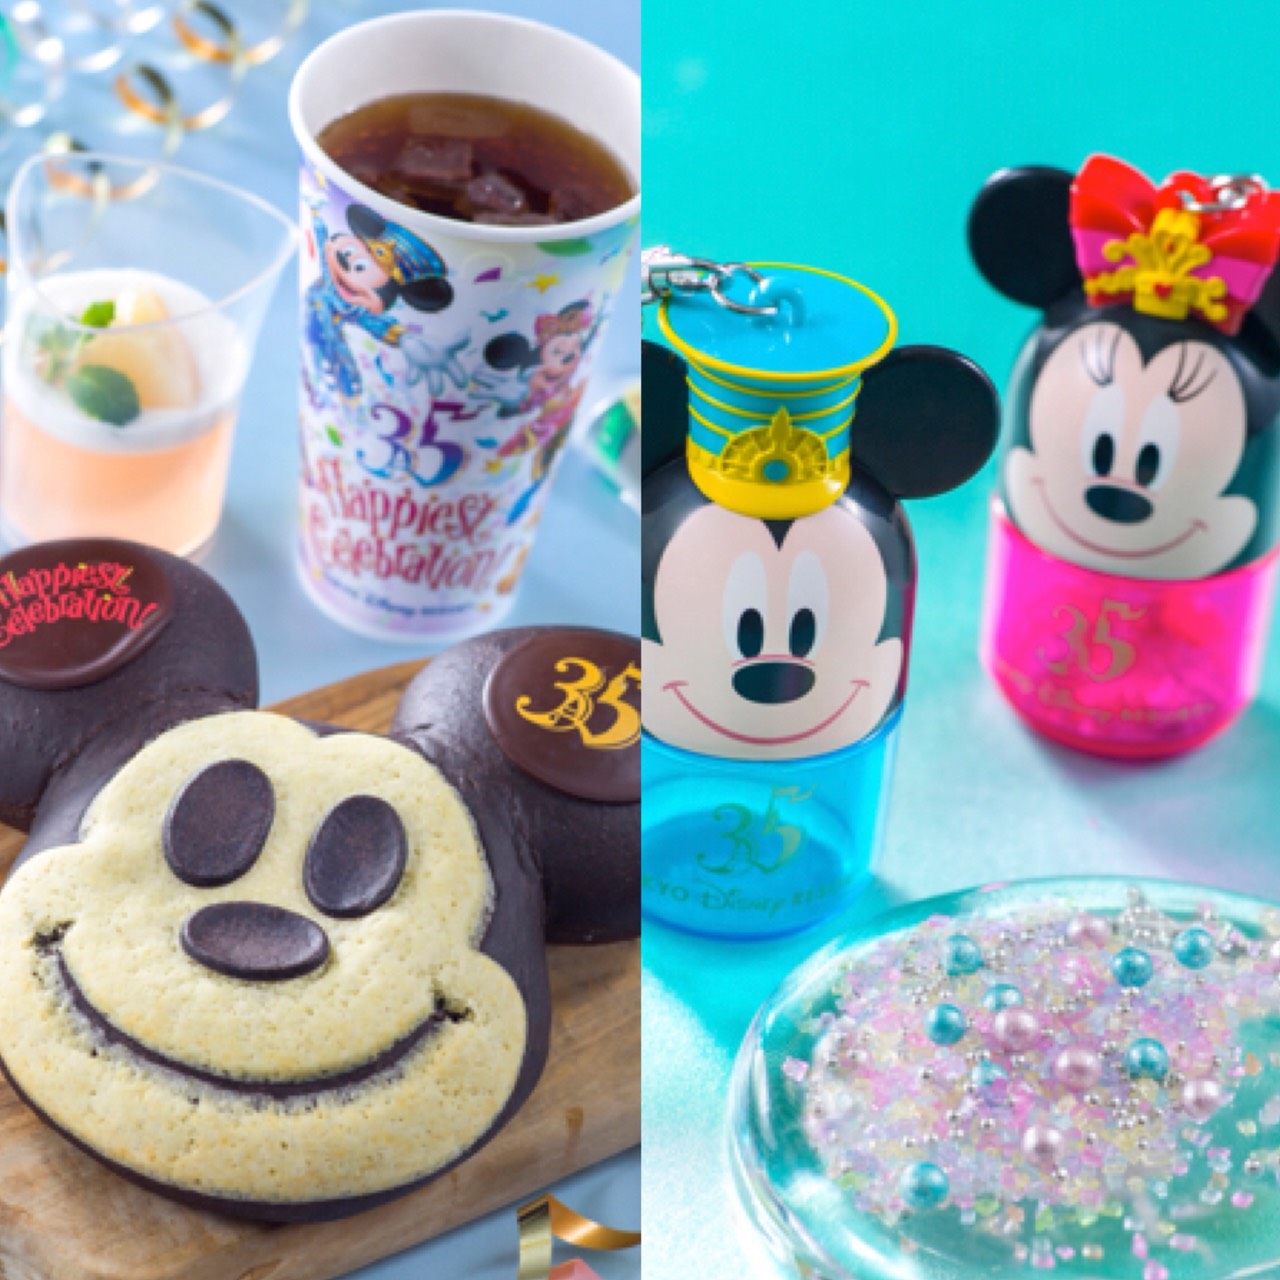 Special Food Menu Arrives Early for Tokyo Disney Resort® 35th Anniversary “Happiest Celebration!” Festival